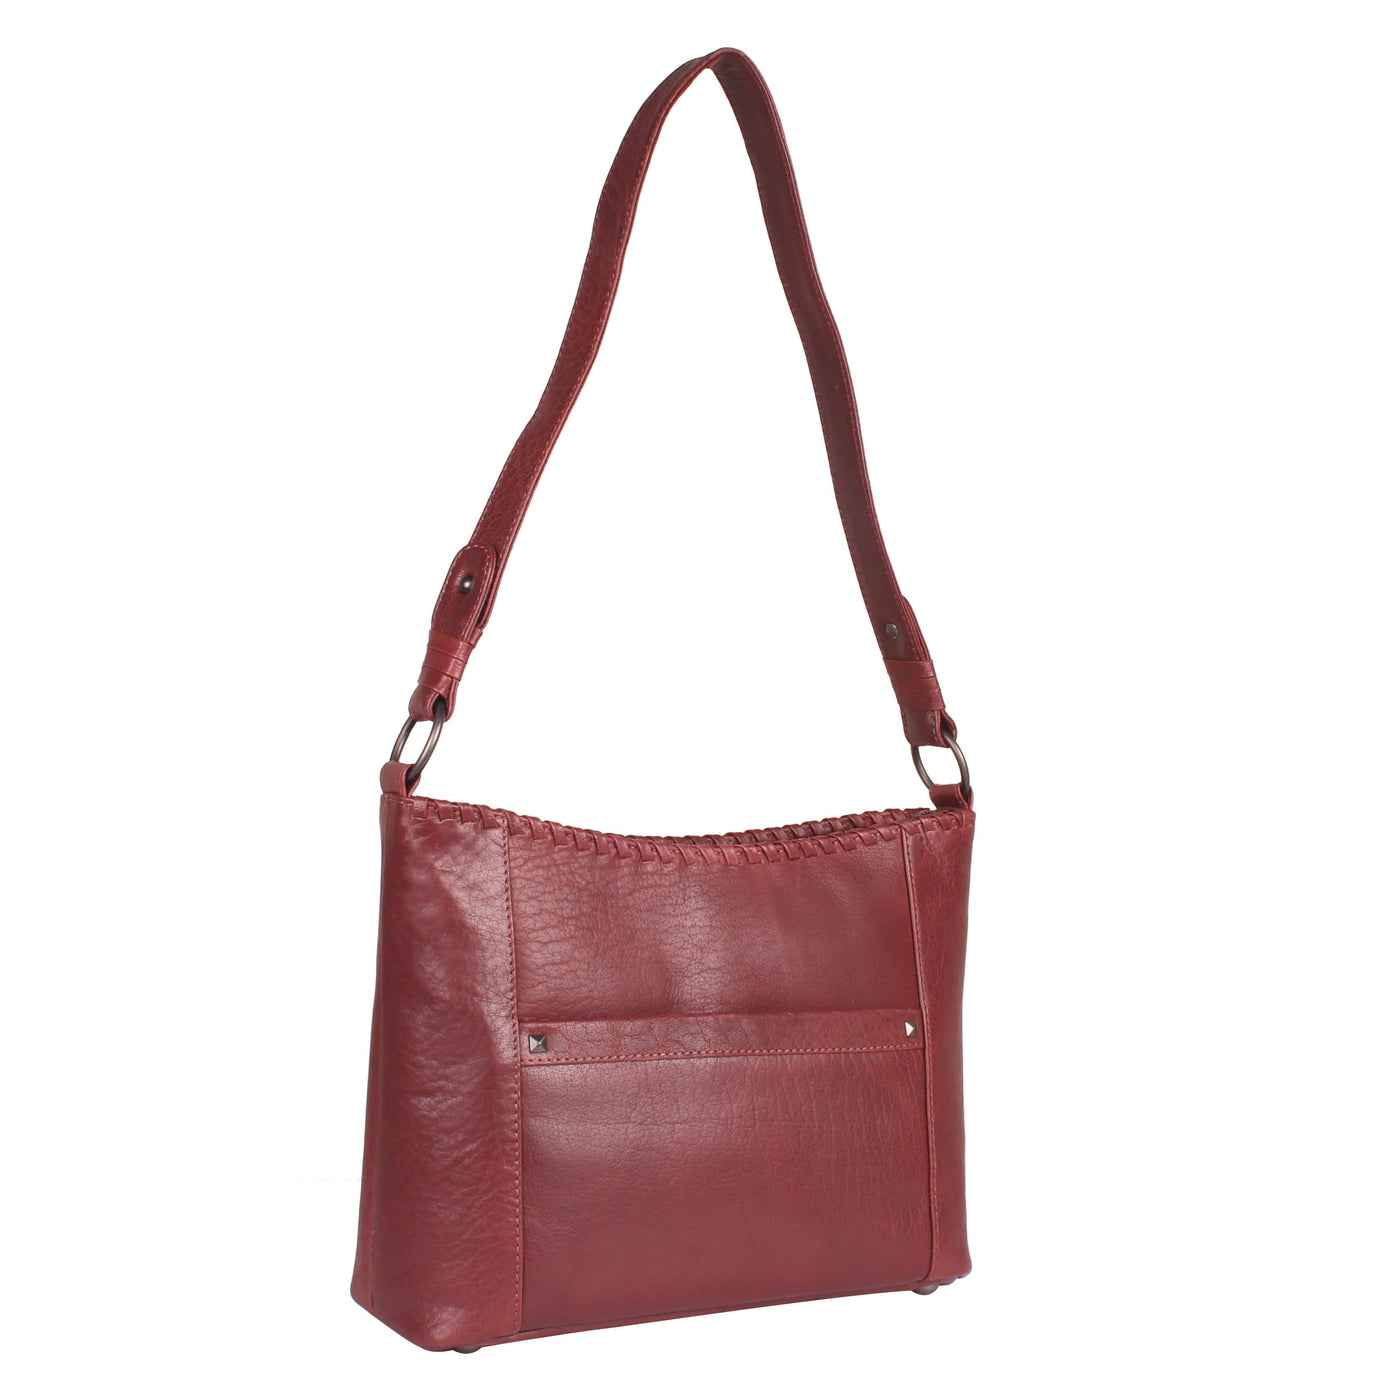 Lady Conceal Concealed Carry Purse Mahogany Concealed Carry Juliana Leather Hobo by Lady Conceal Red